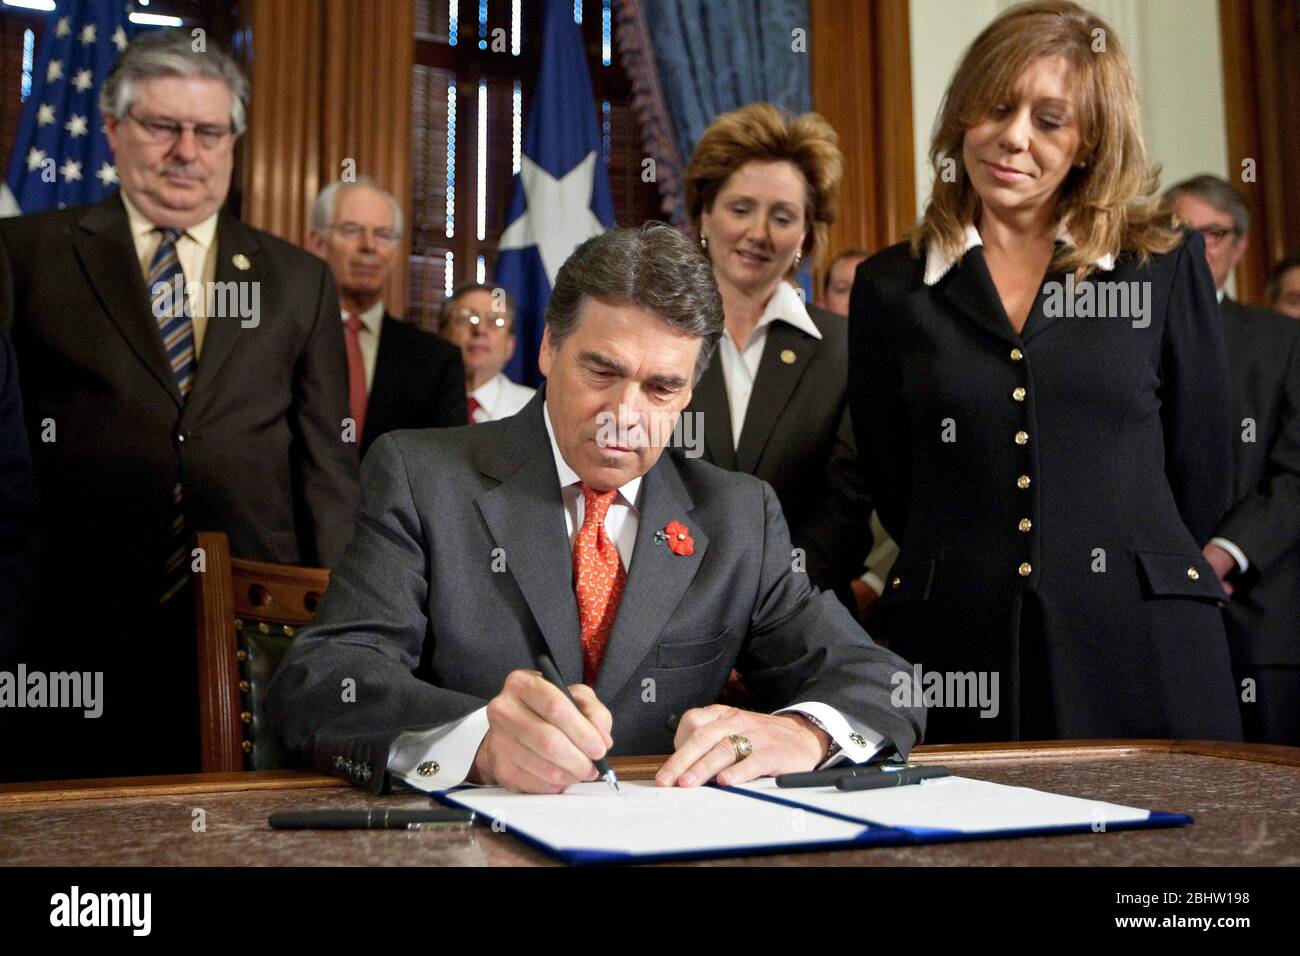 Austin, Texas USA, May 30, 2011: Texas Governor Rick Perry ceremonially signs HB 274, which brings lawsuit reform to Texas courts.  ©Marjorie Kamys Cotera/Daemmrich Photography Stock Photo